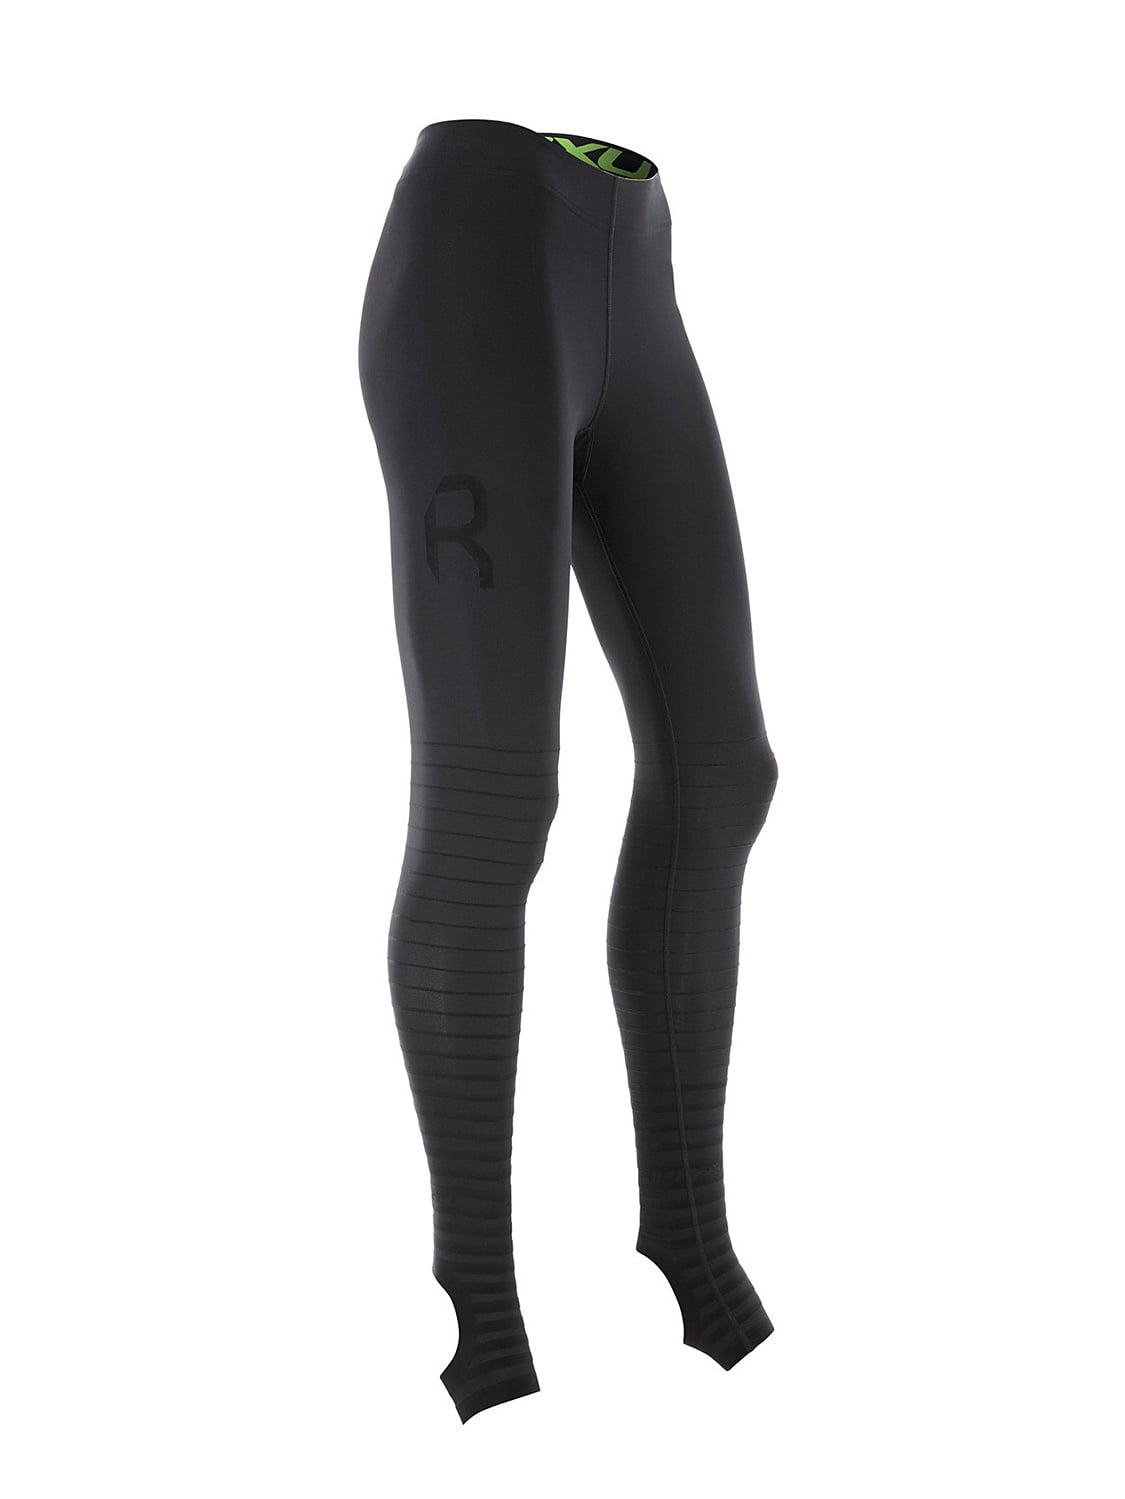 2XU Women's ELITE RECOVERY Compression Tights -